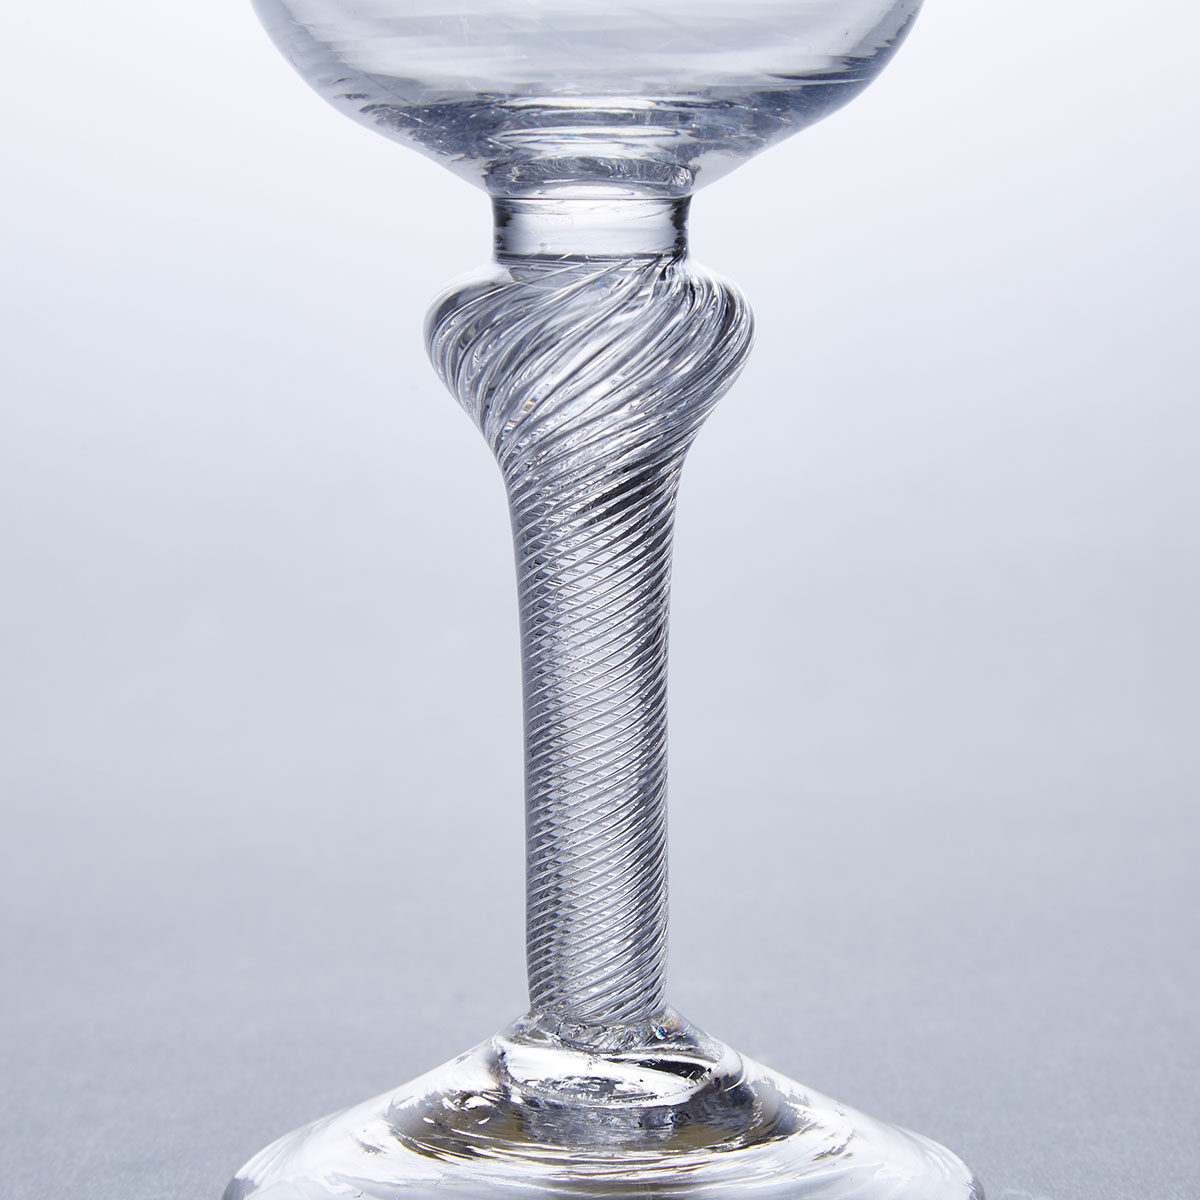 English Knopped Airtwist Stemmed Large Wine Glass, c.1750-60